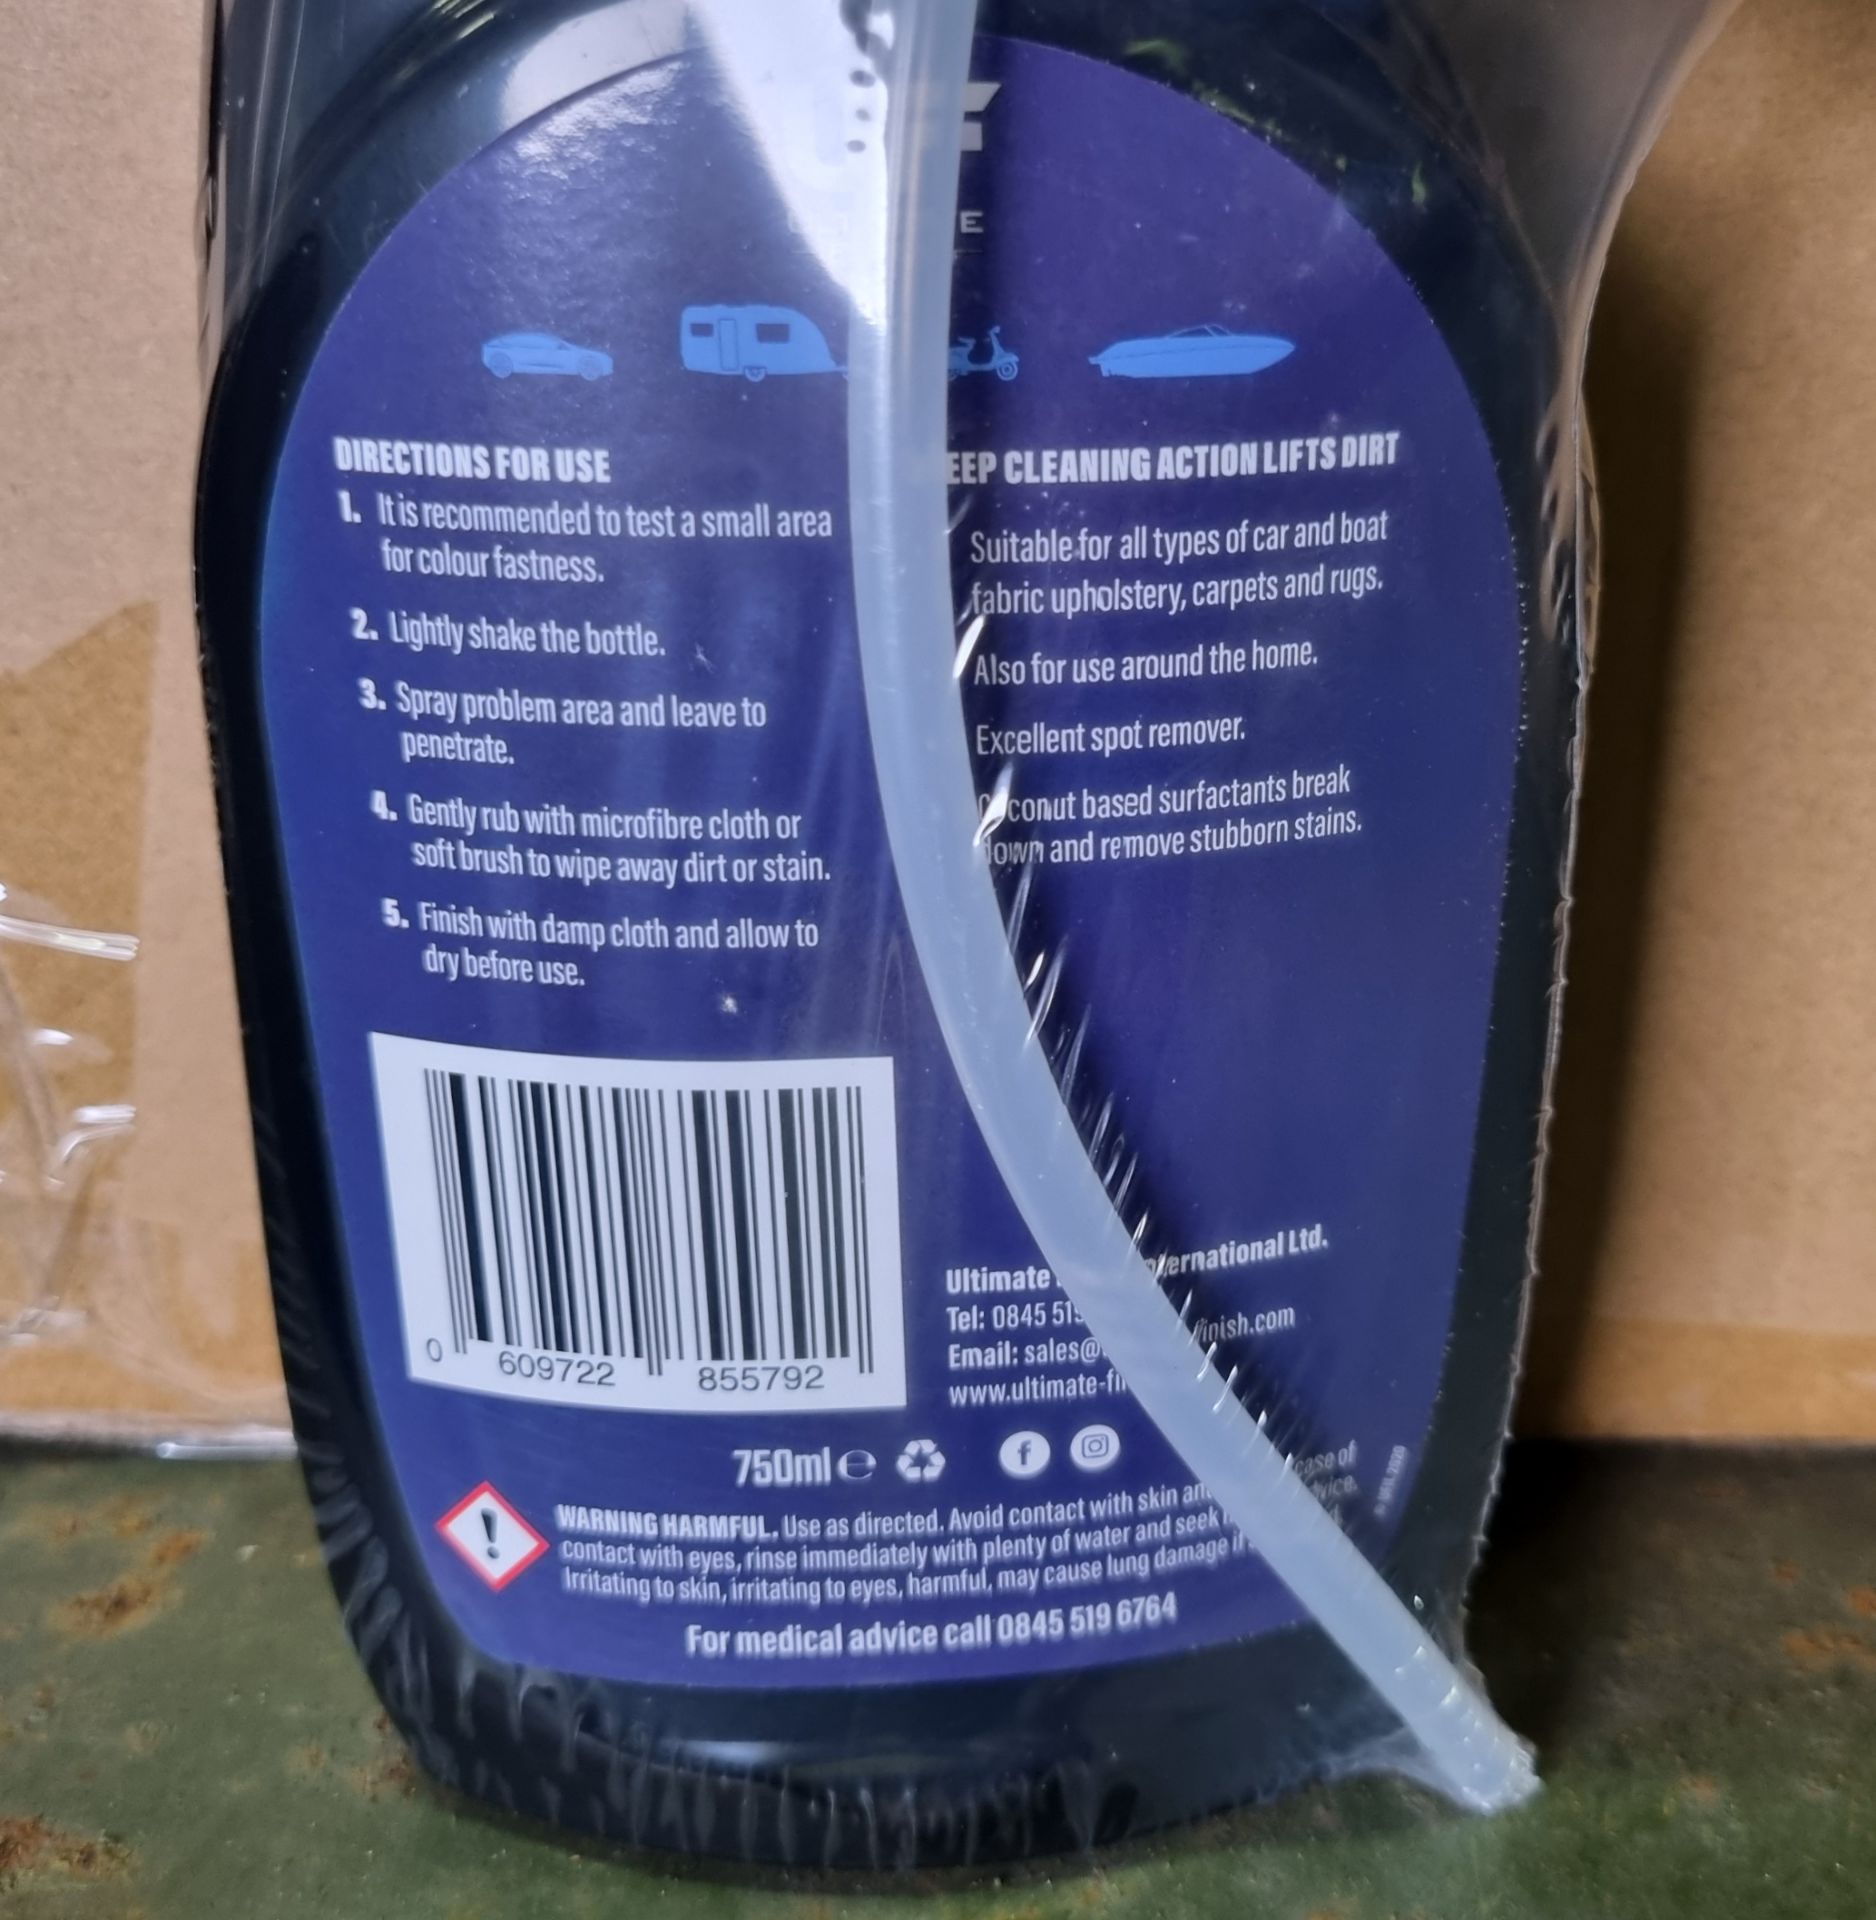 56x bottles of Ultimate Finish carpet and upholstery cleaner - 750ml - Image 6 of 6